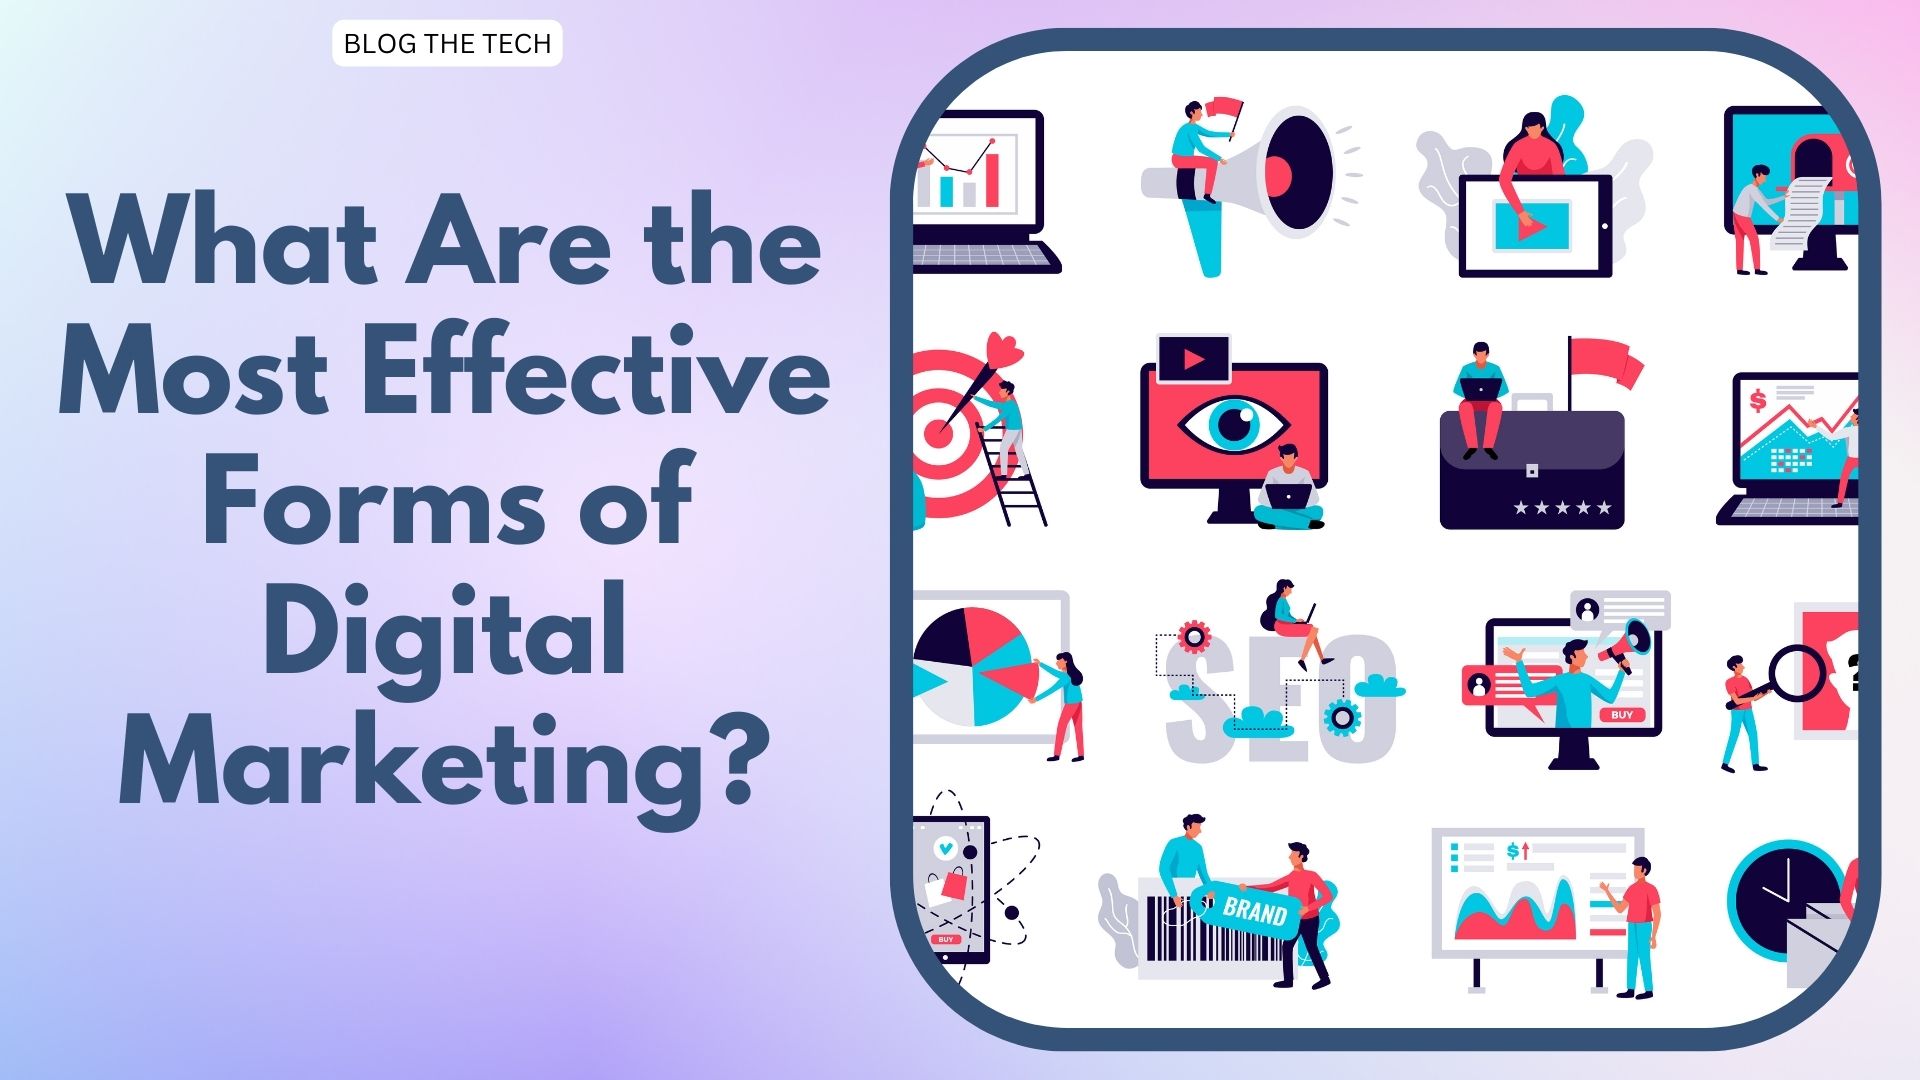 What Are the Most Effective Forms of Digital Marketing?